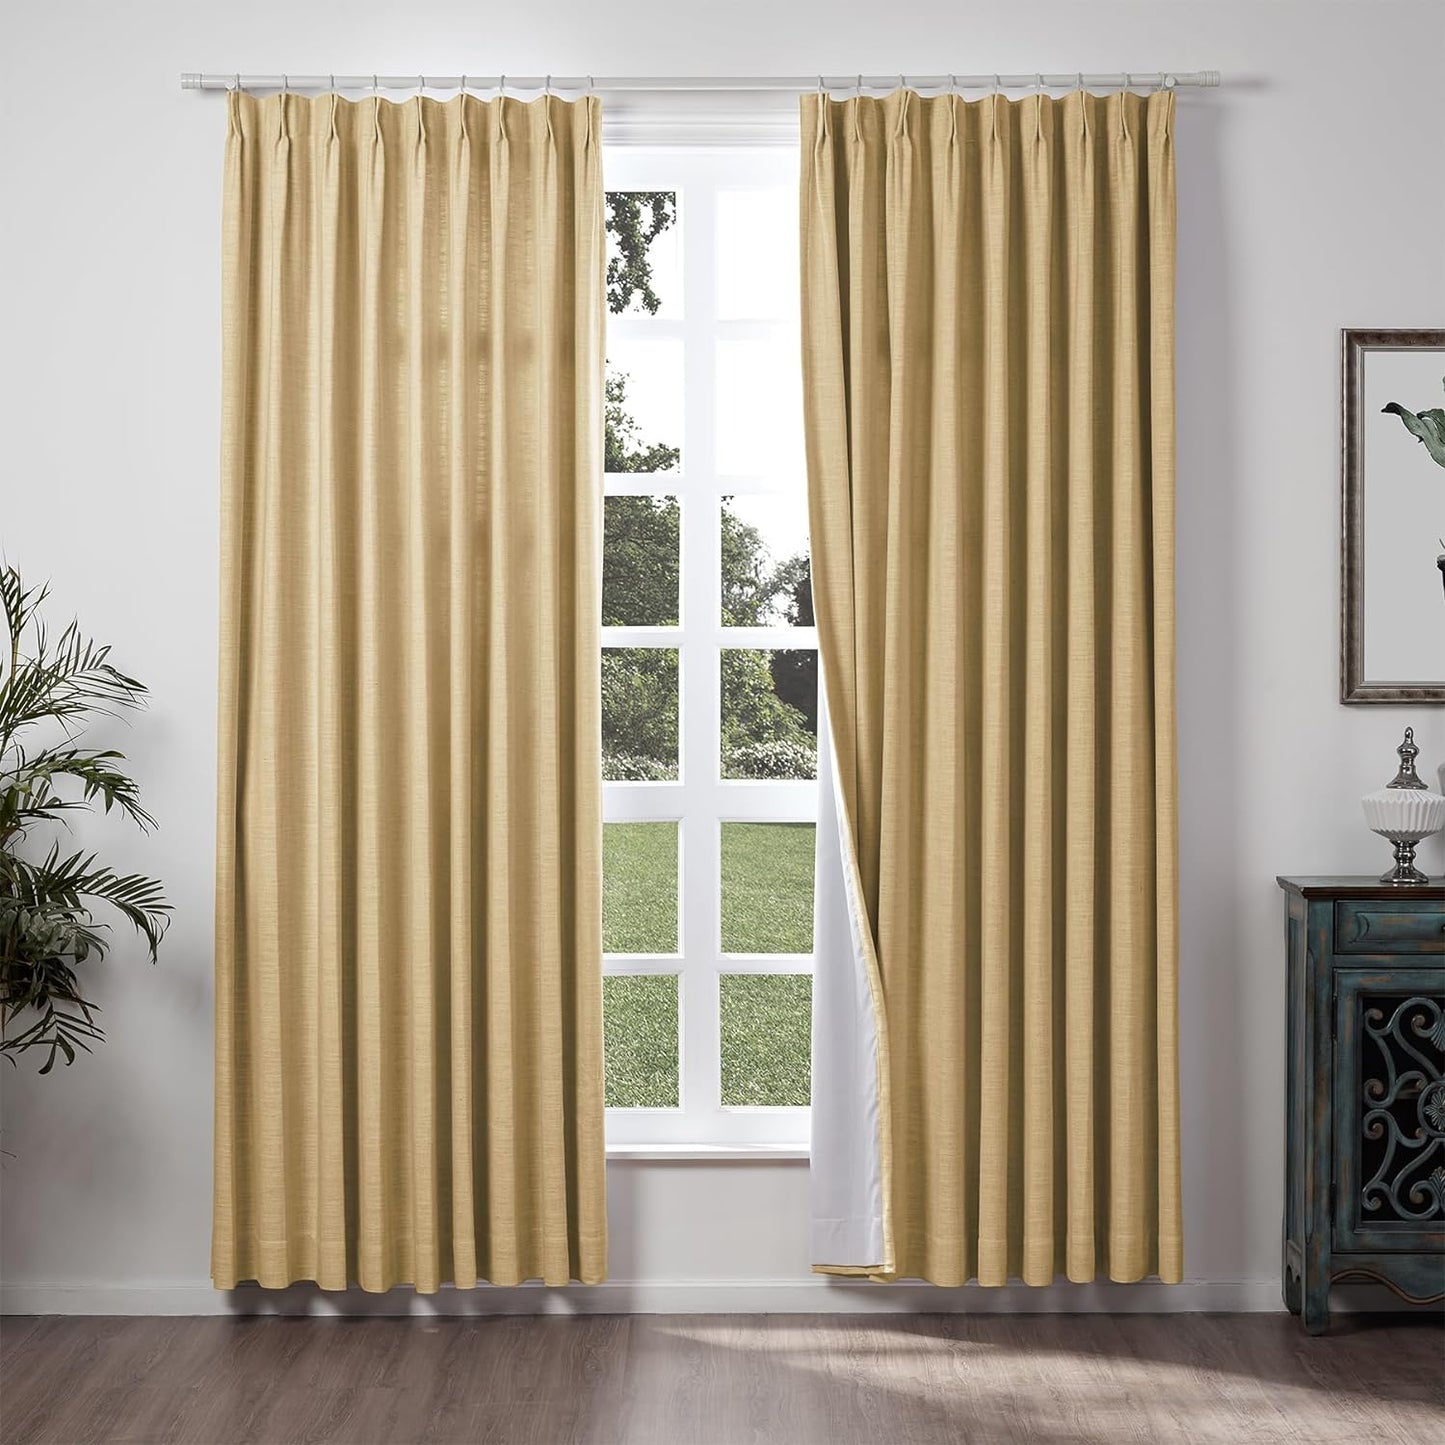 Chadmade 50" W X 84" L Polyester Linen Drape with Blackout Lining Pinch Pleat Curtain for Sliding Door Patio Door Living Room Bedroom, (1 Panel) Beige White Liz Collection  ChadMade Khaki (28) 100Wx96L 